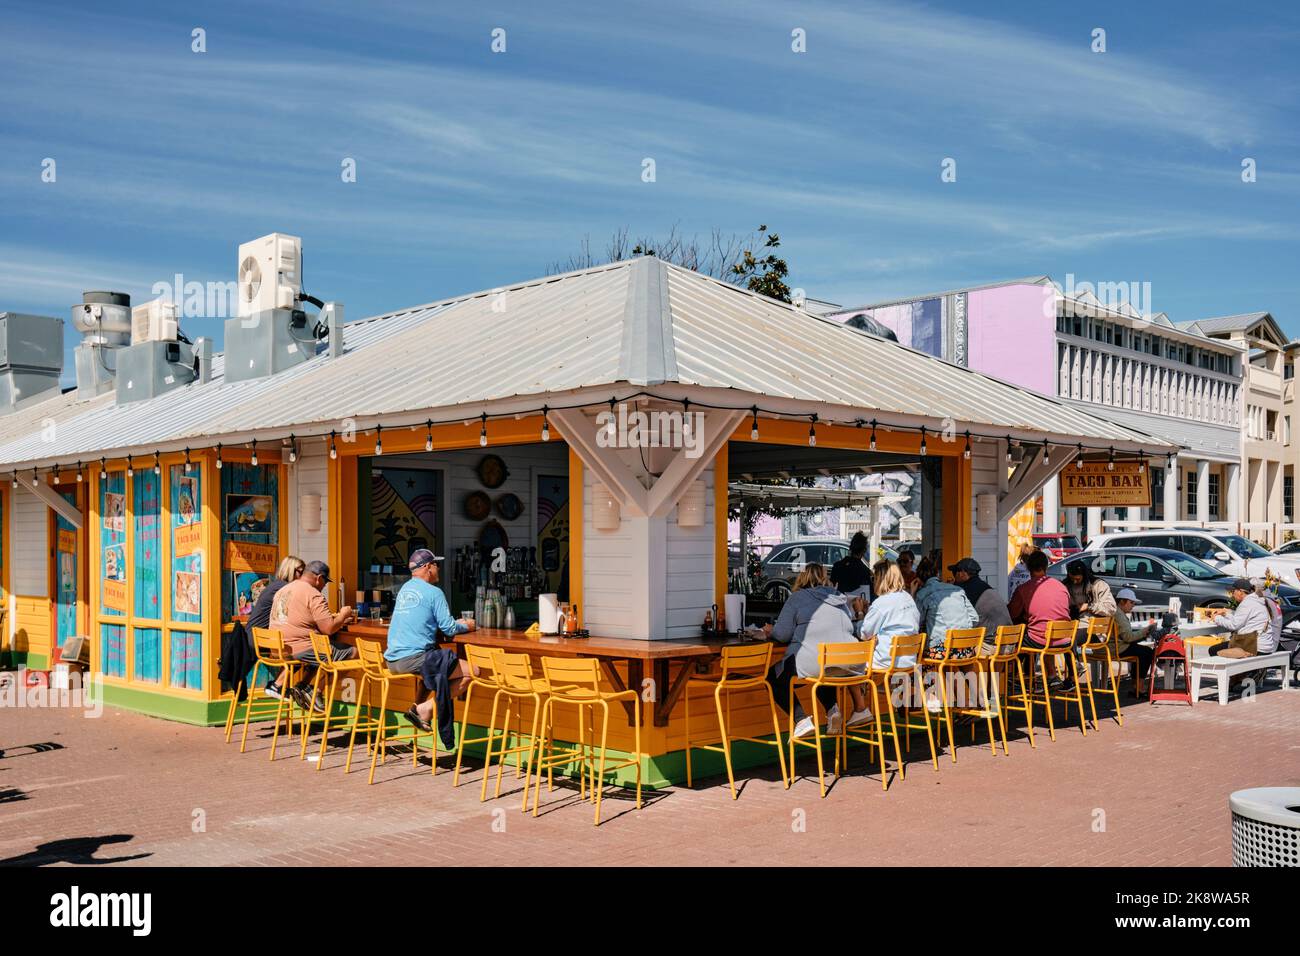 People ordering and eating at a an outdoor taco bar or taco stand restaurant in the resort town of Seaside Florida, USA. Stock Photo